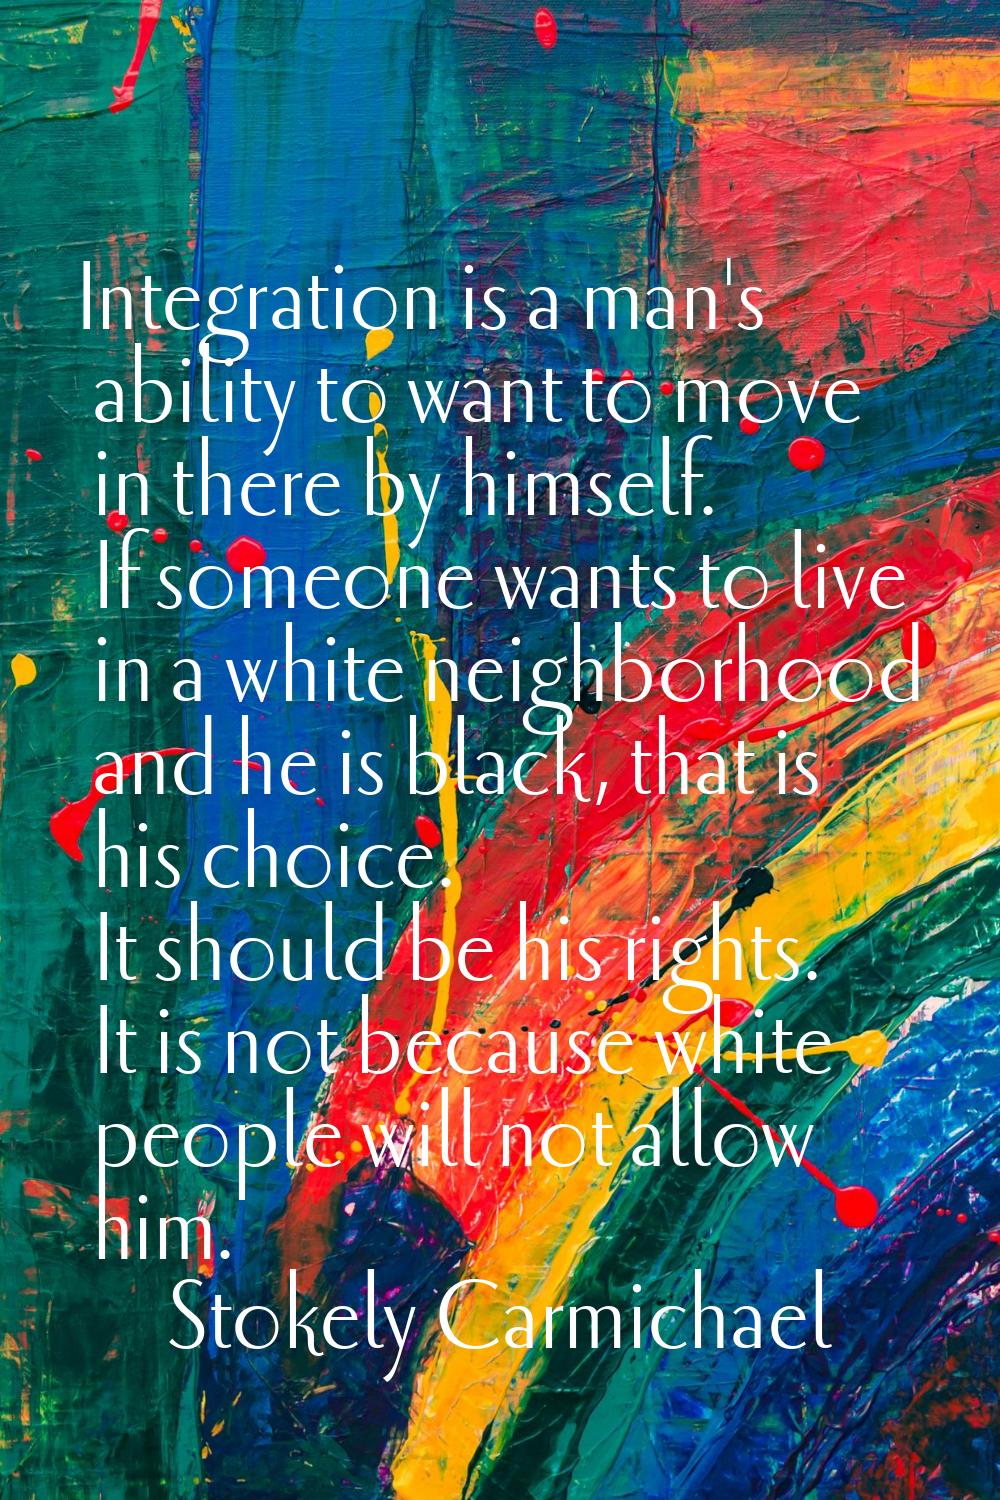 Integration is a man's ability to want to move in there by himself. If someone wants to live in a w